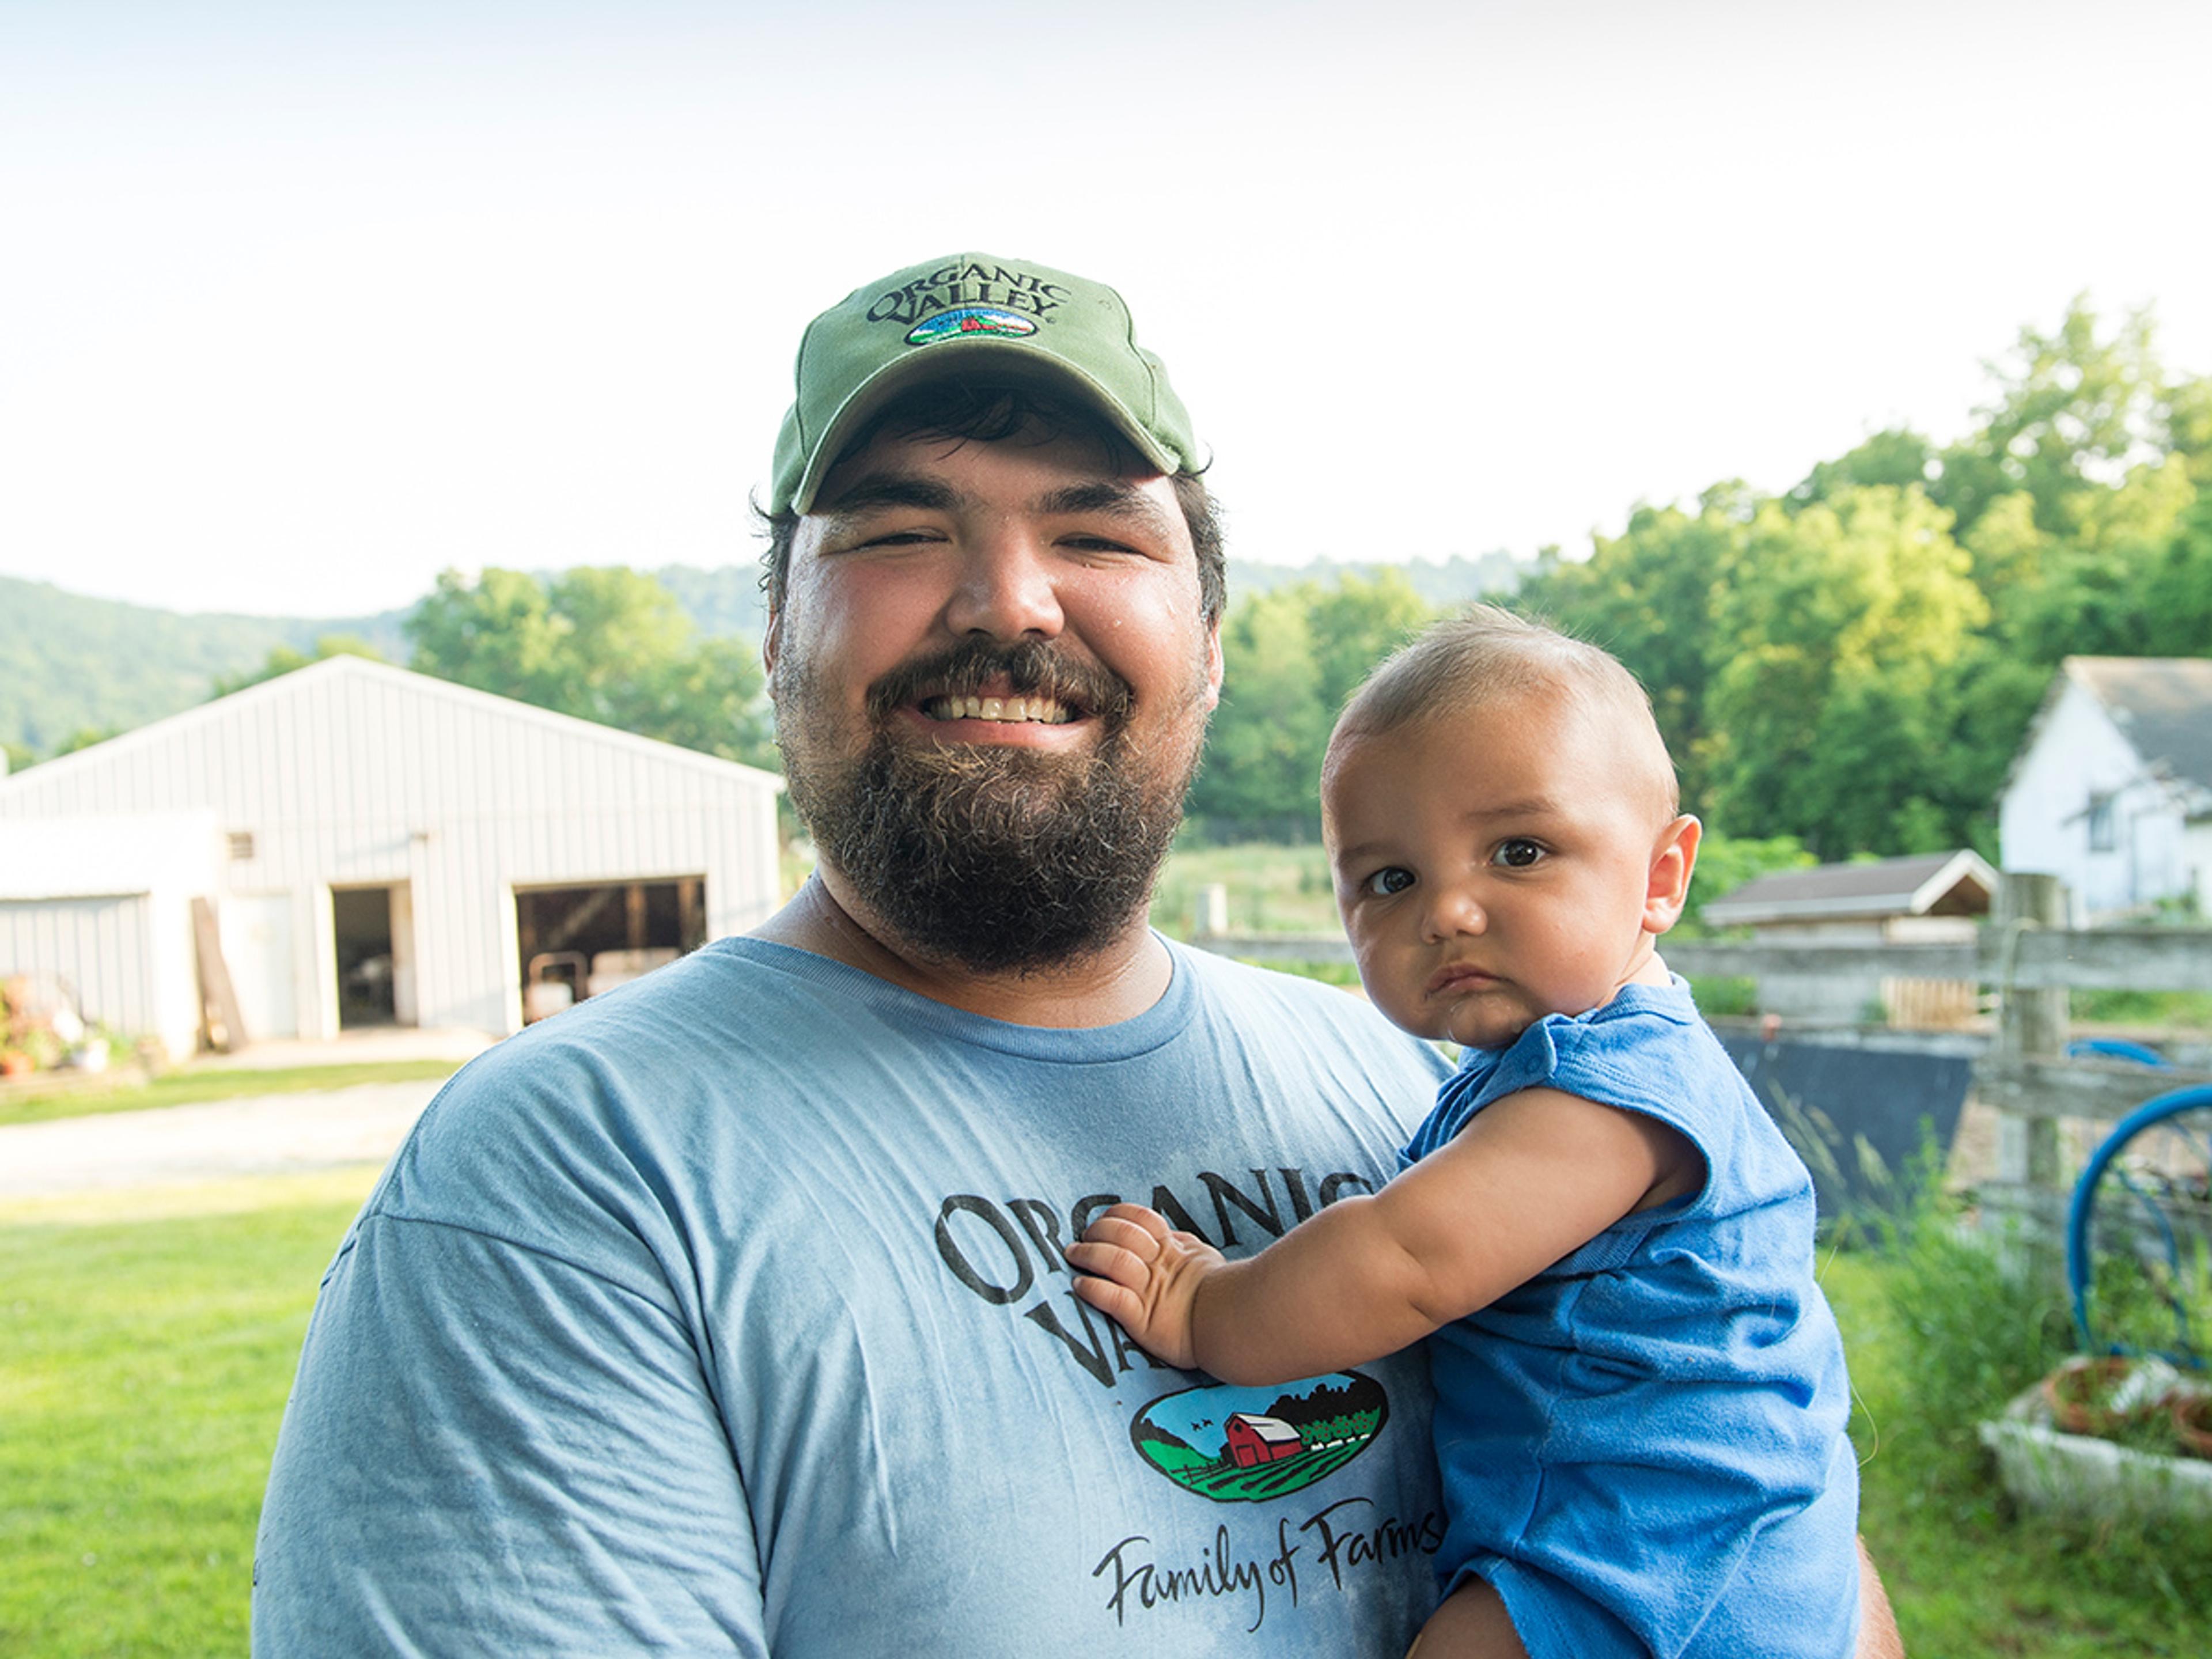 A bearded Joel Goede wearing an Organic Valley baseball cap smiles and holds his baby. 